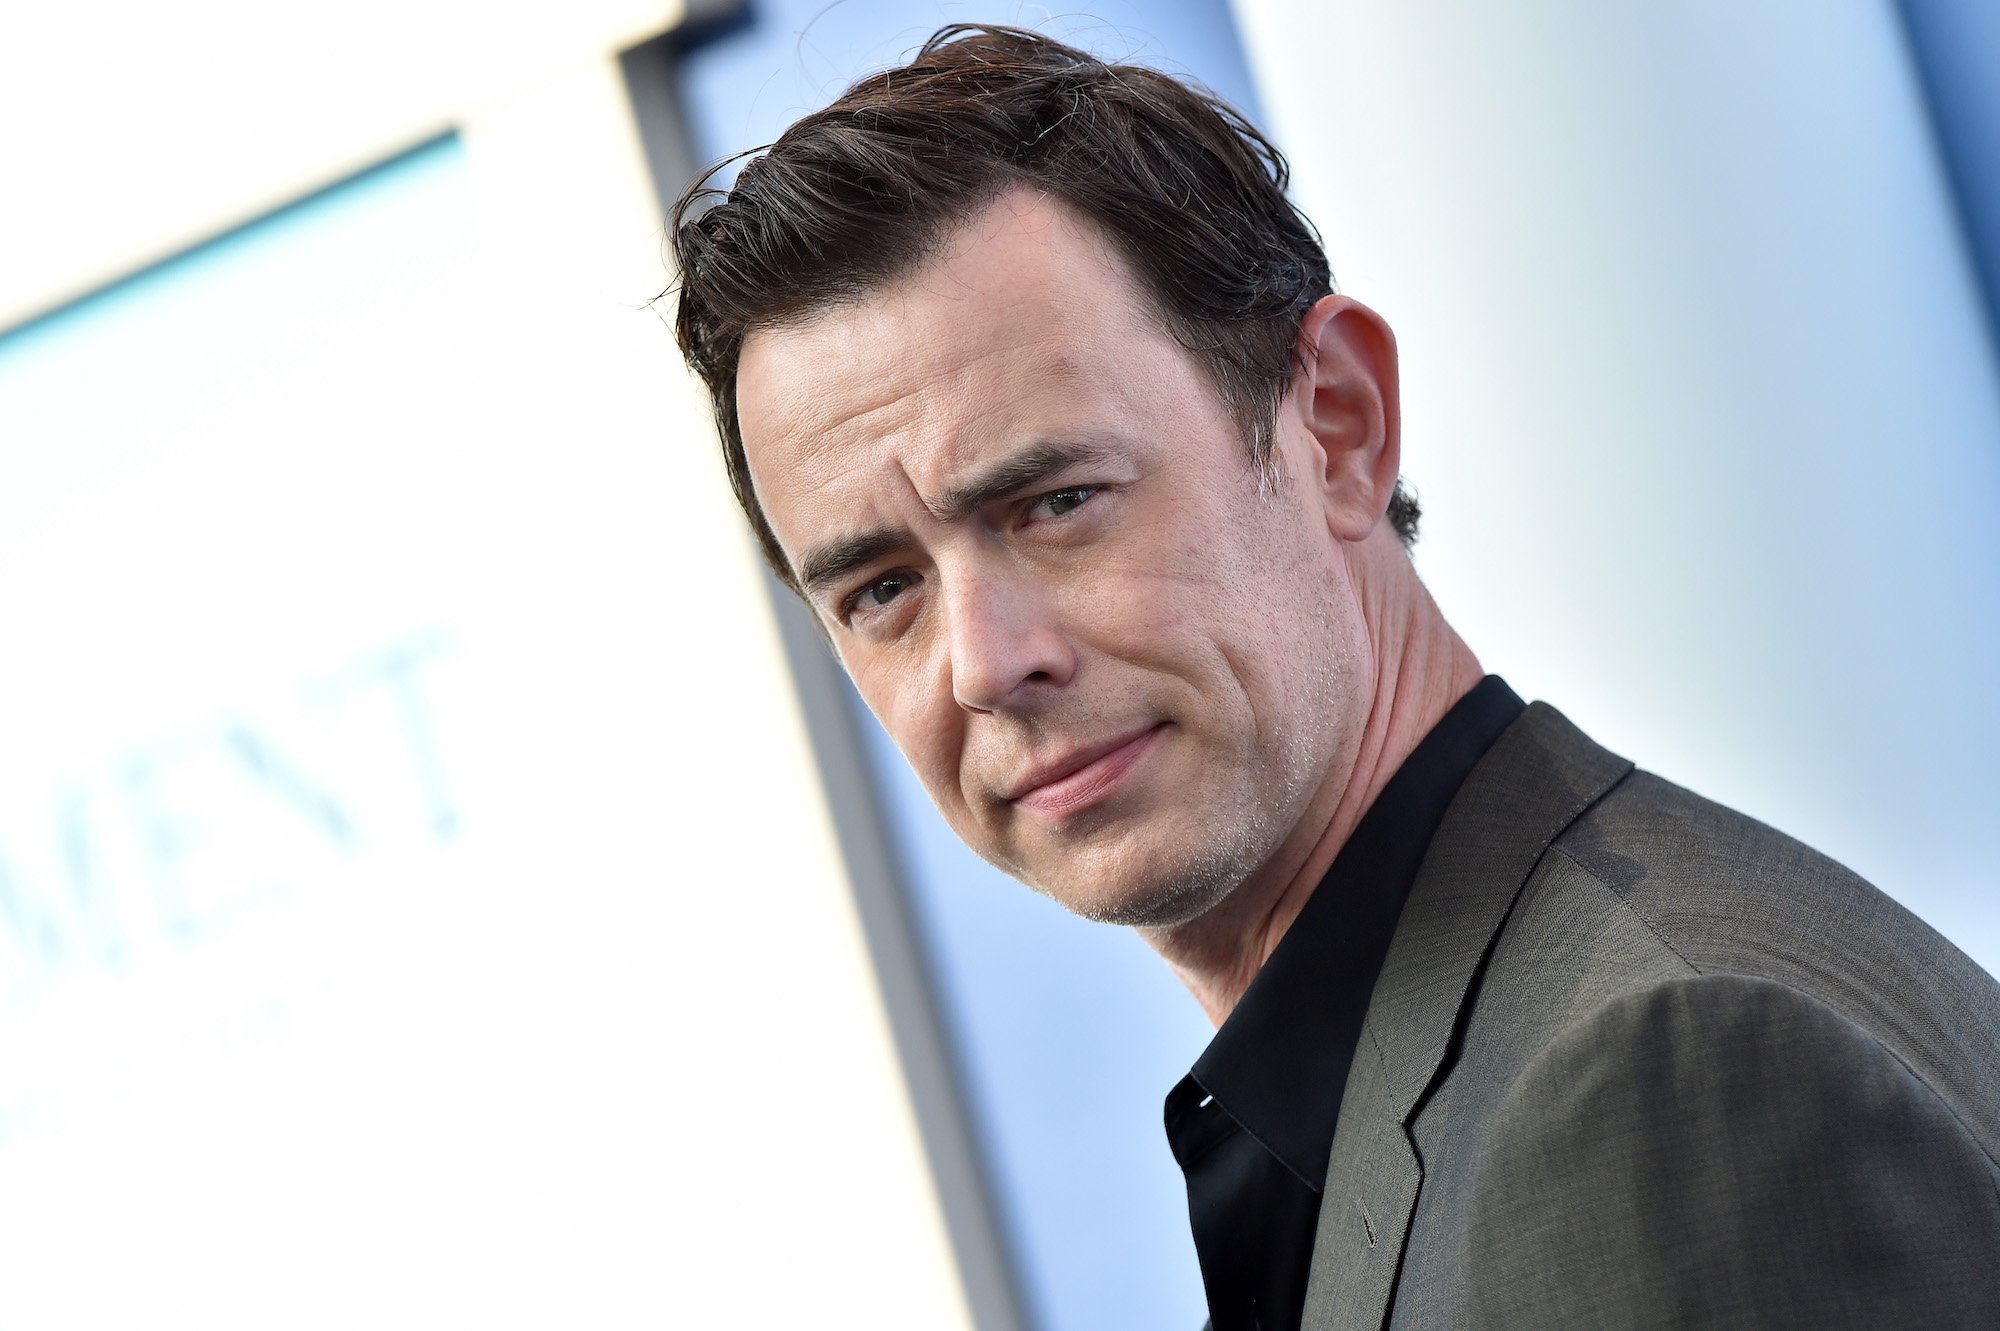 'Dexter' star Colin Hanks turns to the camera